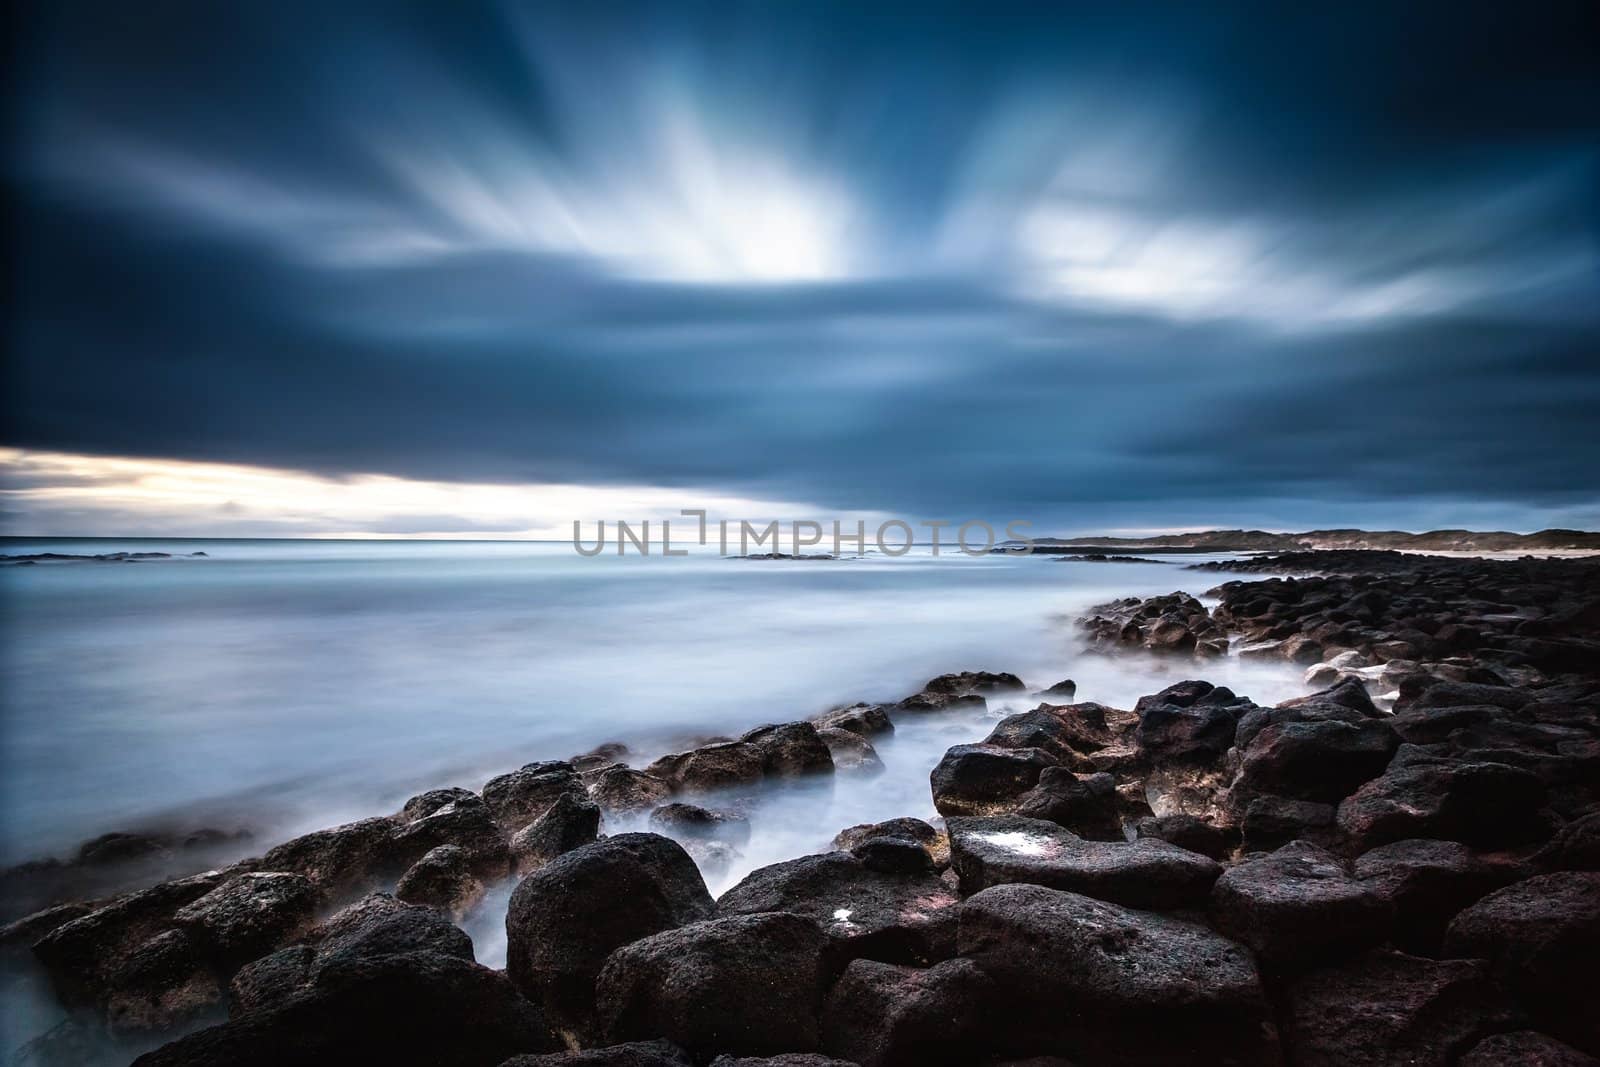 Another shot from a cold sunset shoot. Extra long exposure was used to capture the cross flowing cloud and flat sea.